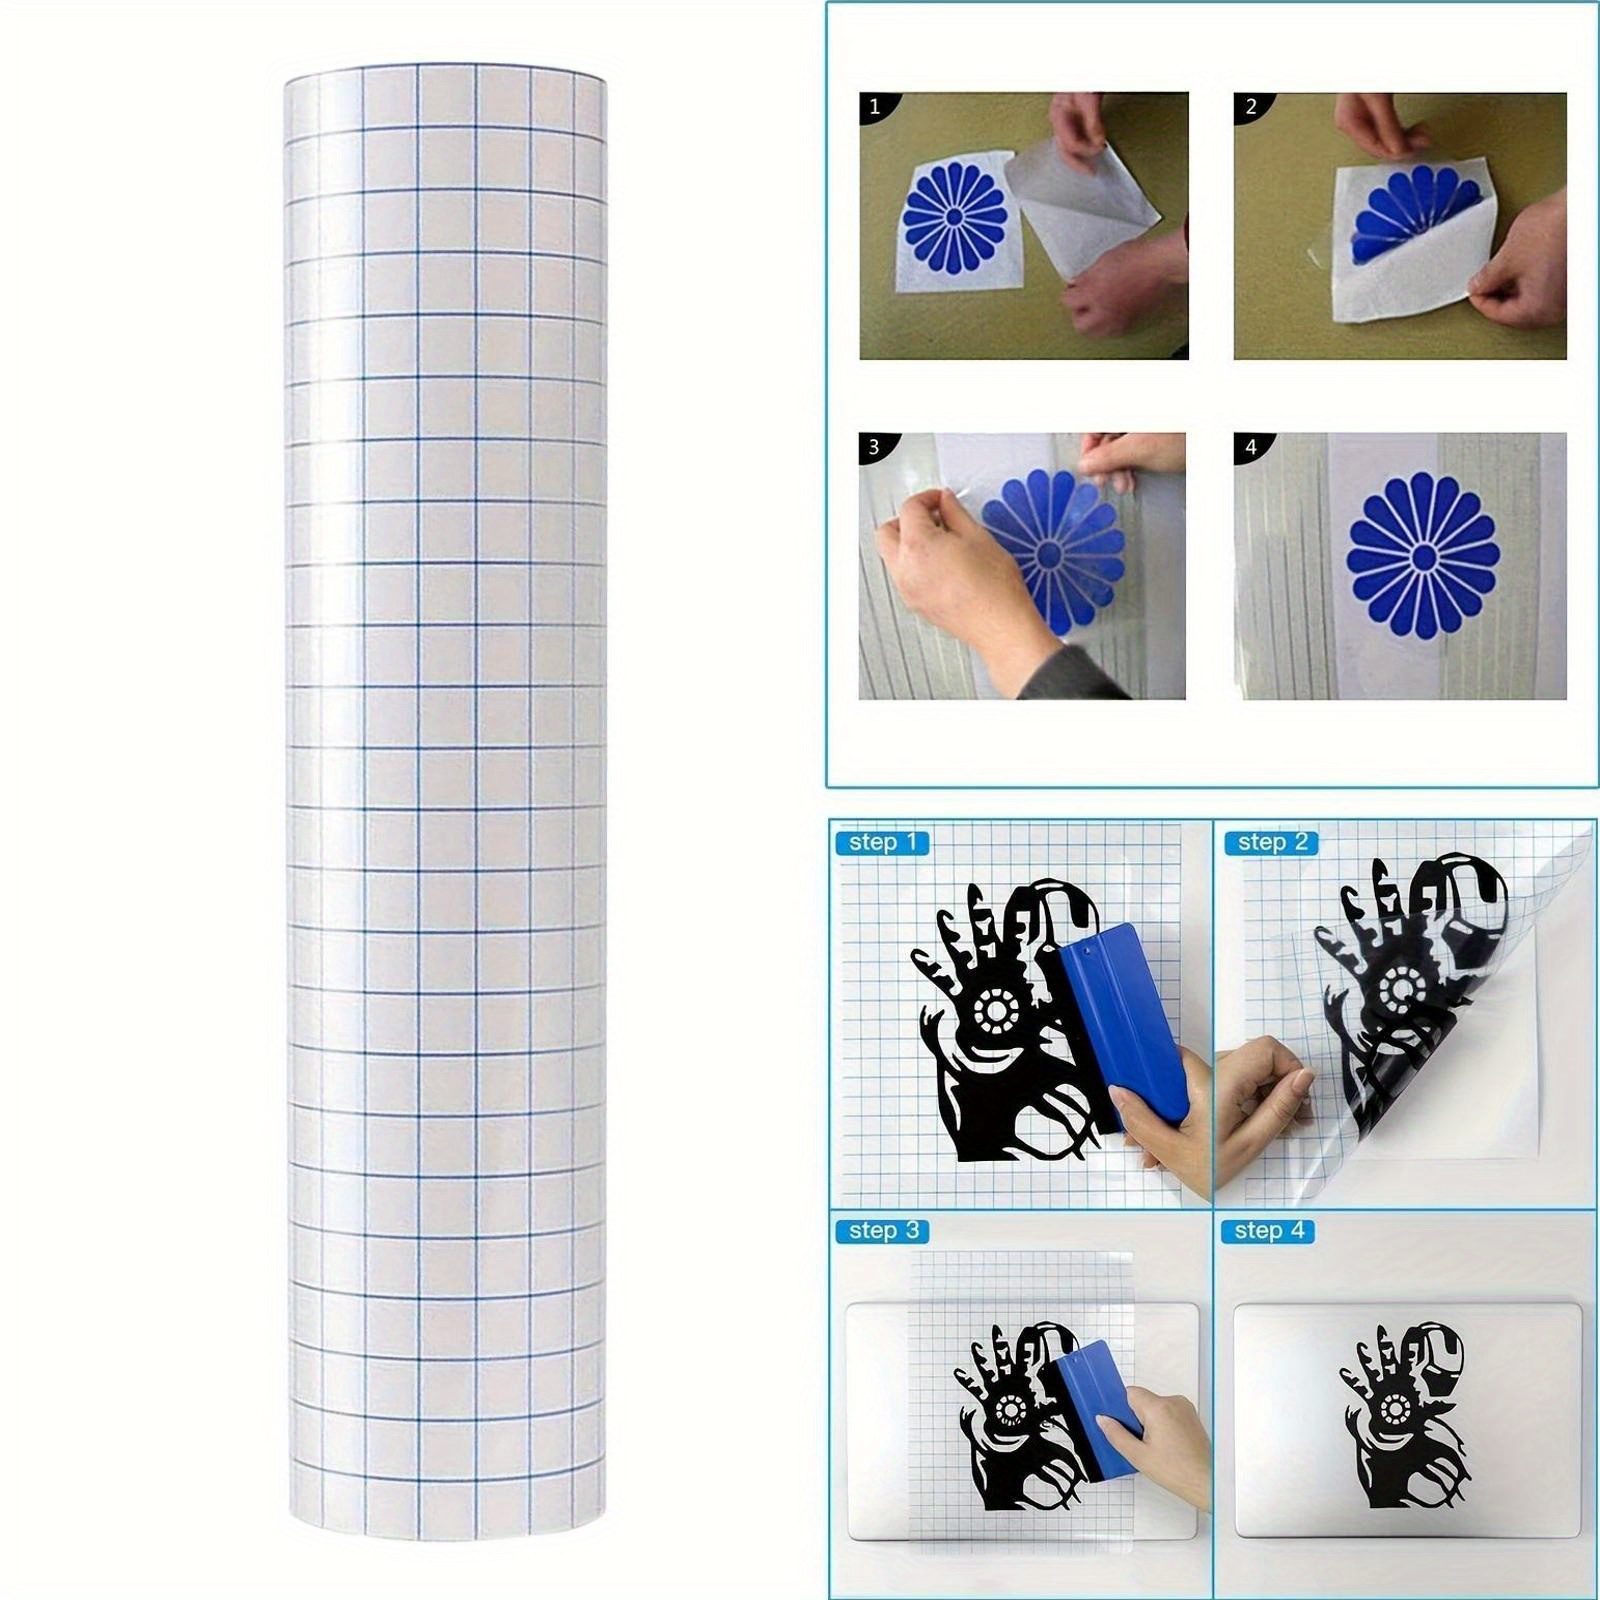 

Transfer Film For Vinyl Stickers - Self-adhesive, Perfect For Car Decals & Personalized Graphics, 1 Roll